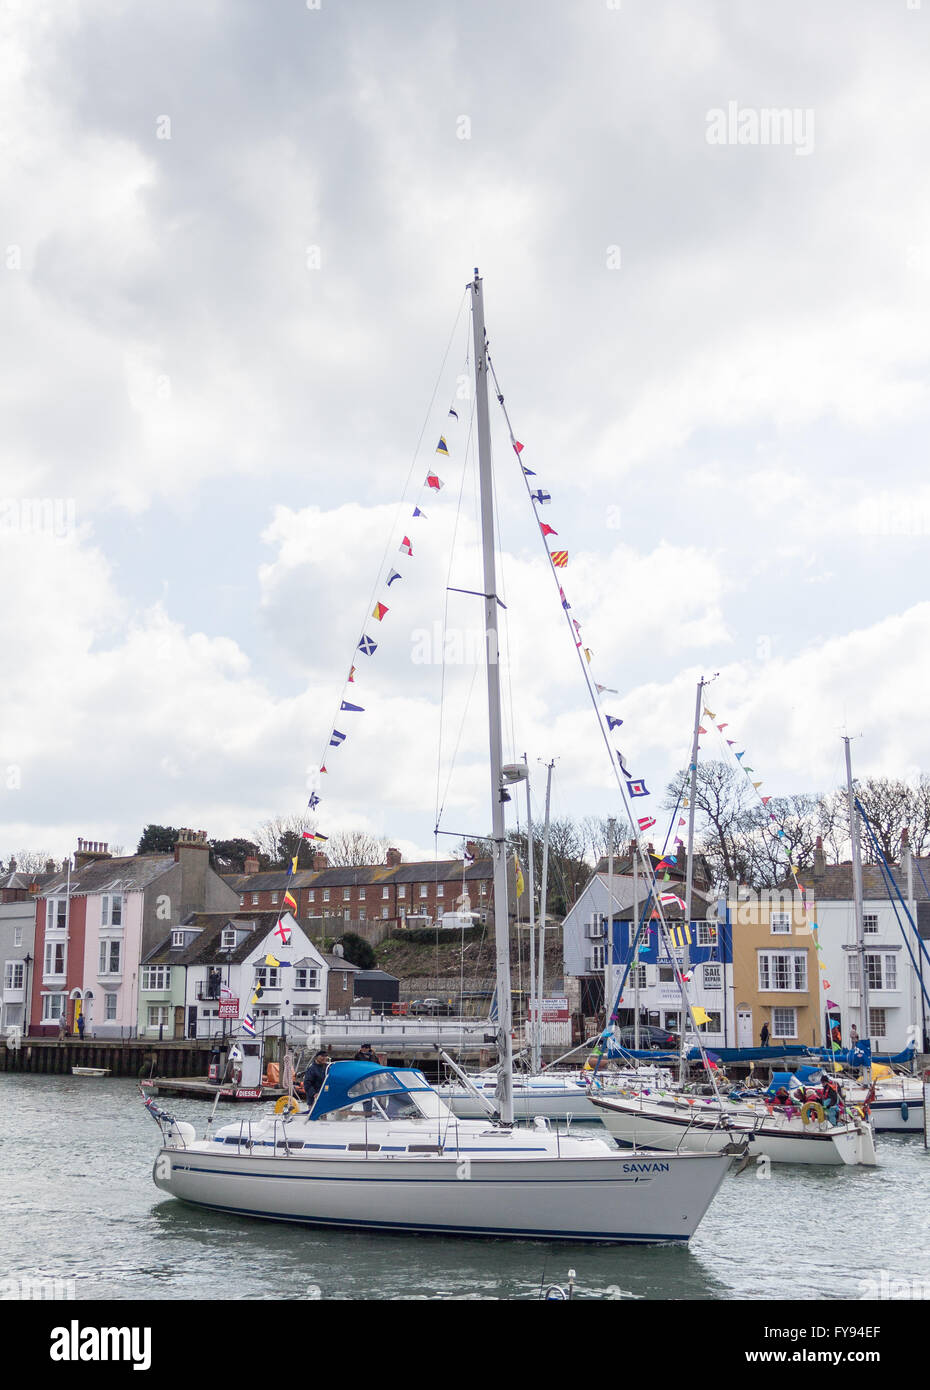 Weymouth, England. 23 April 2016. Queen's 90th Birthday Floating Tribute. Sawan decked with flags. Credit:  Frances Underwood/Alamy Live News Stock Photo